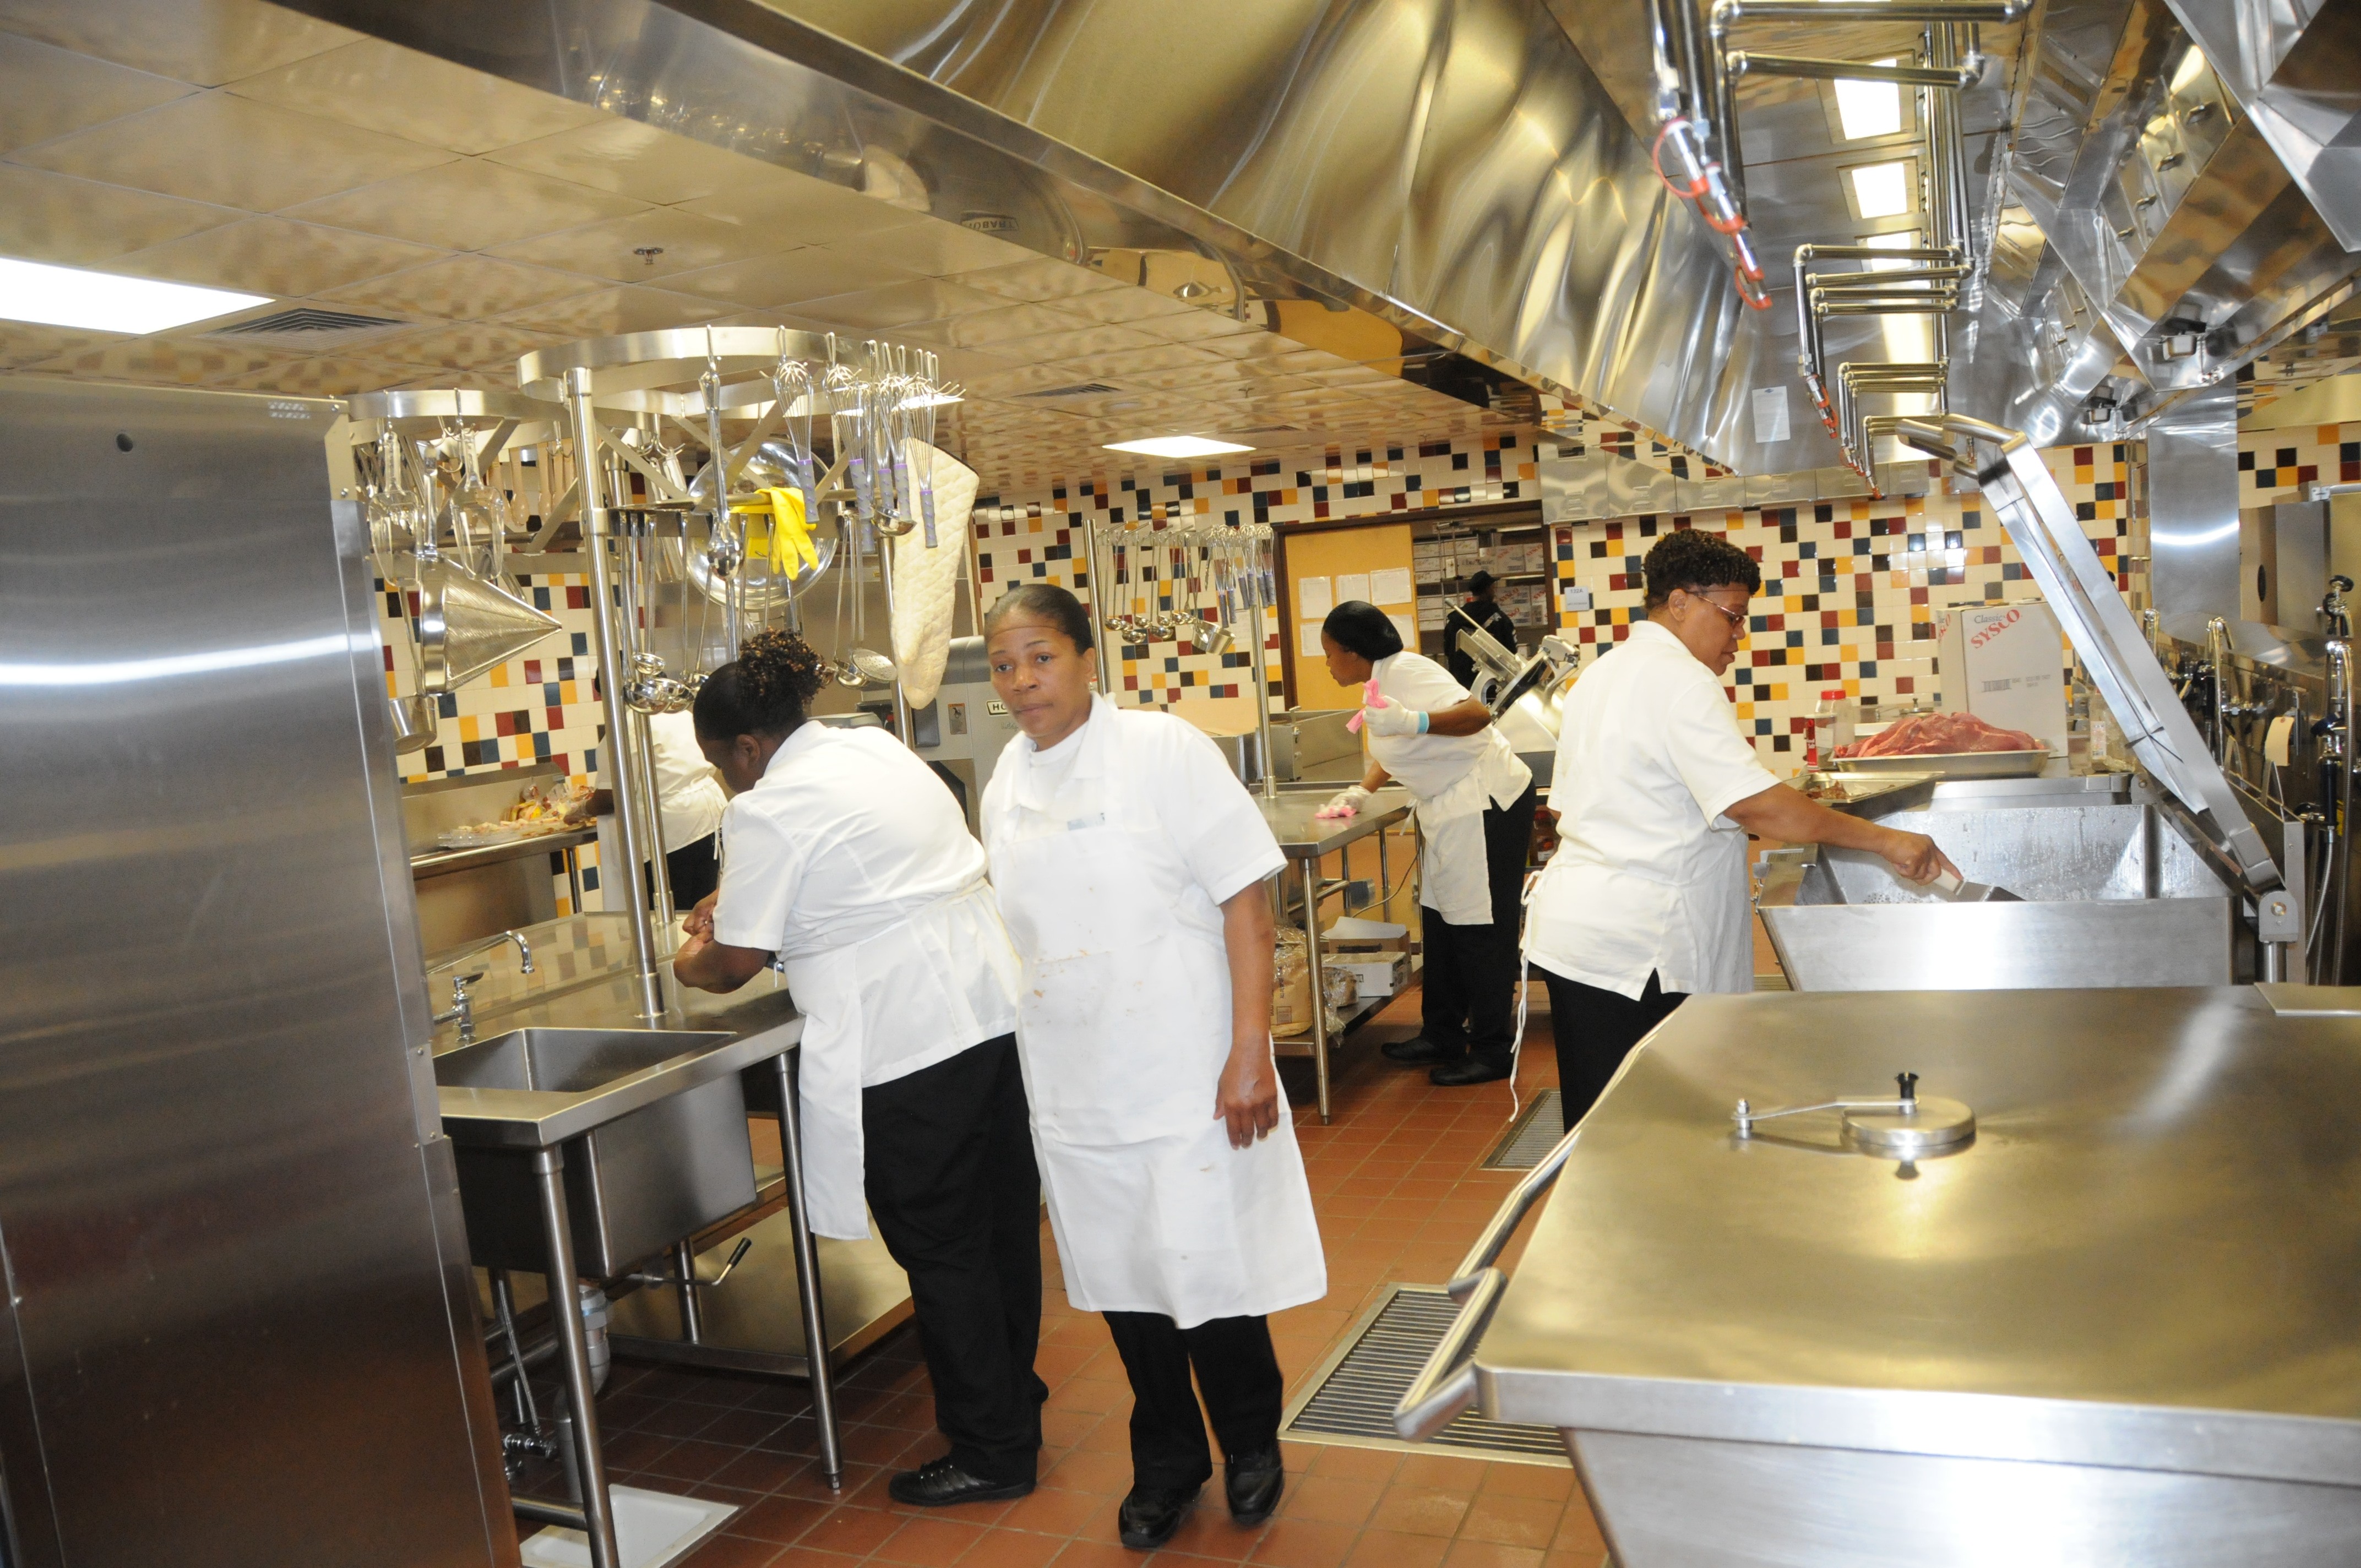 Army's largest dining facility opens at Fort Lee | Article | The United  States Army